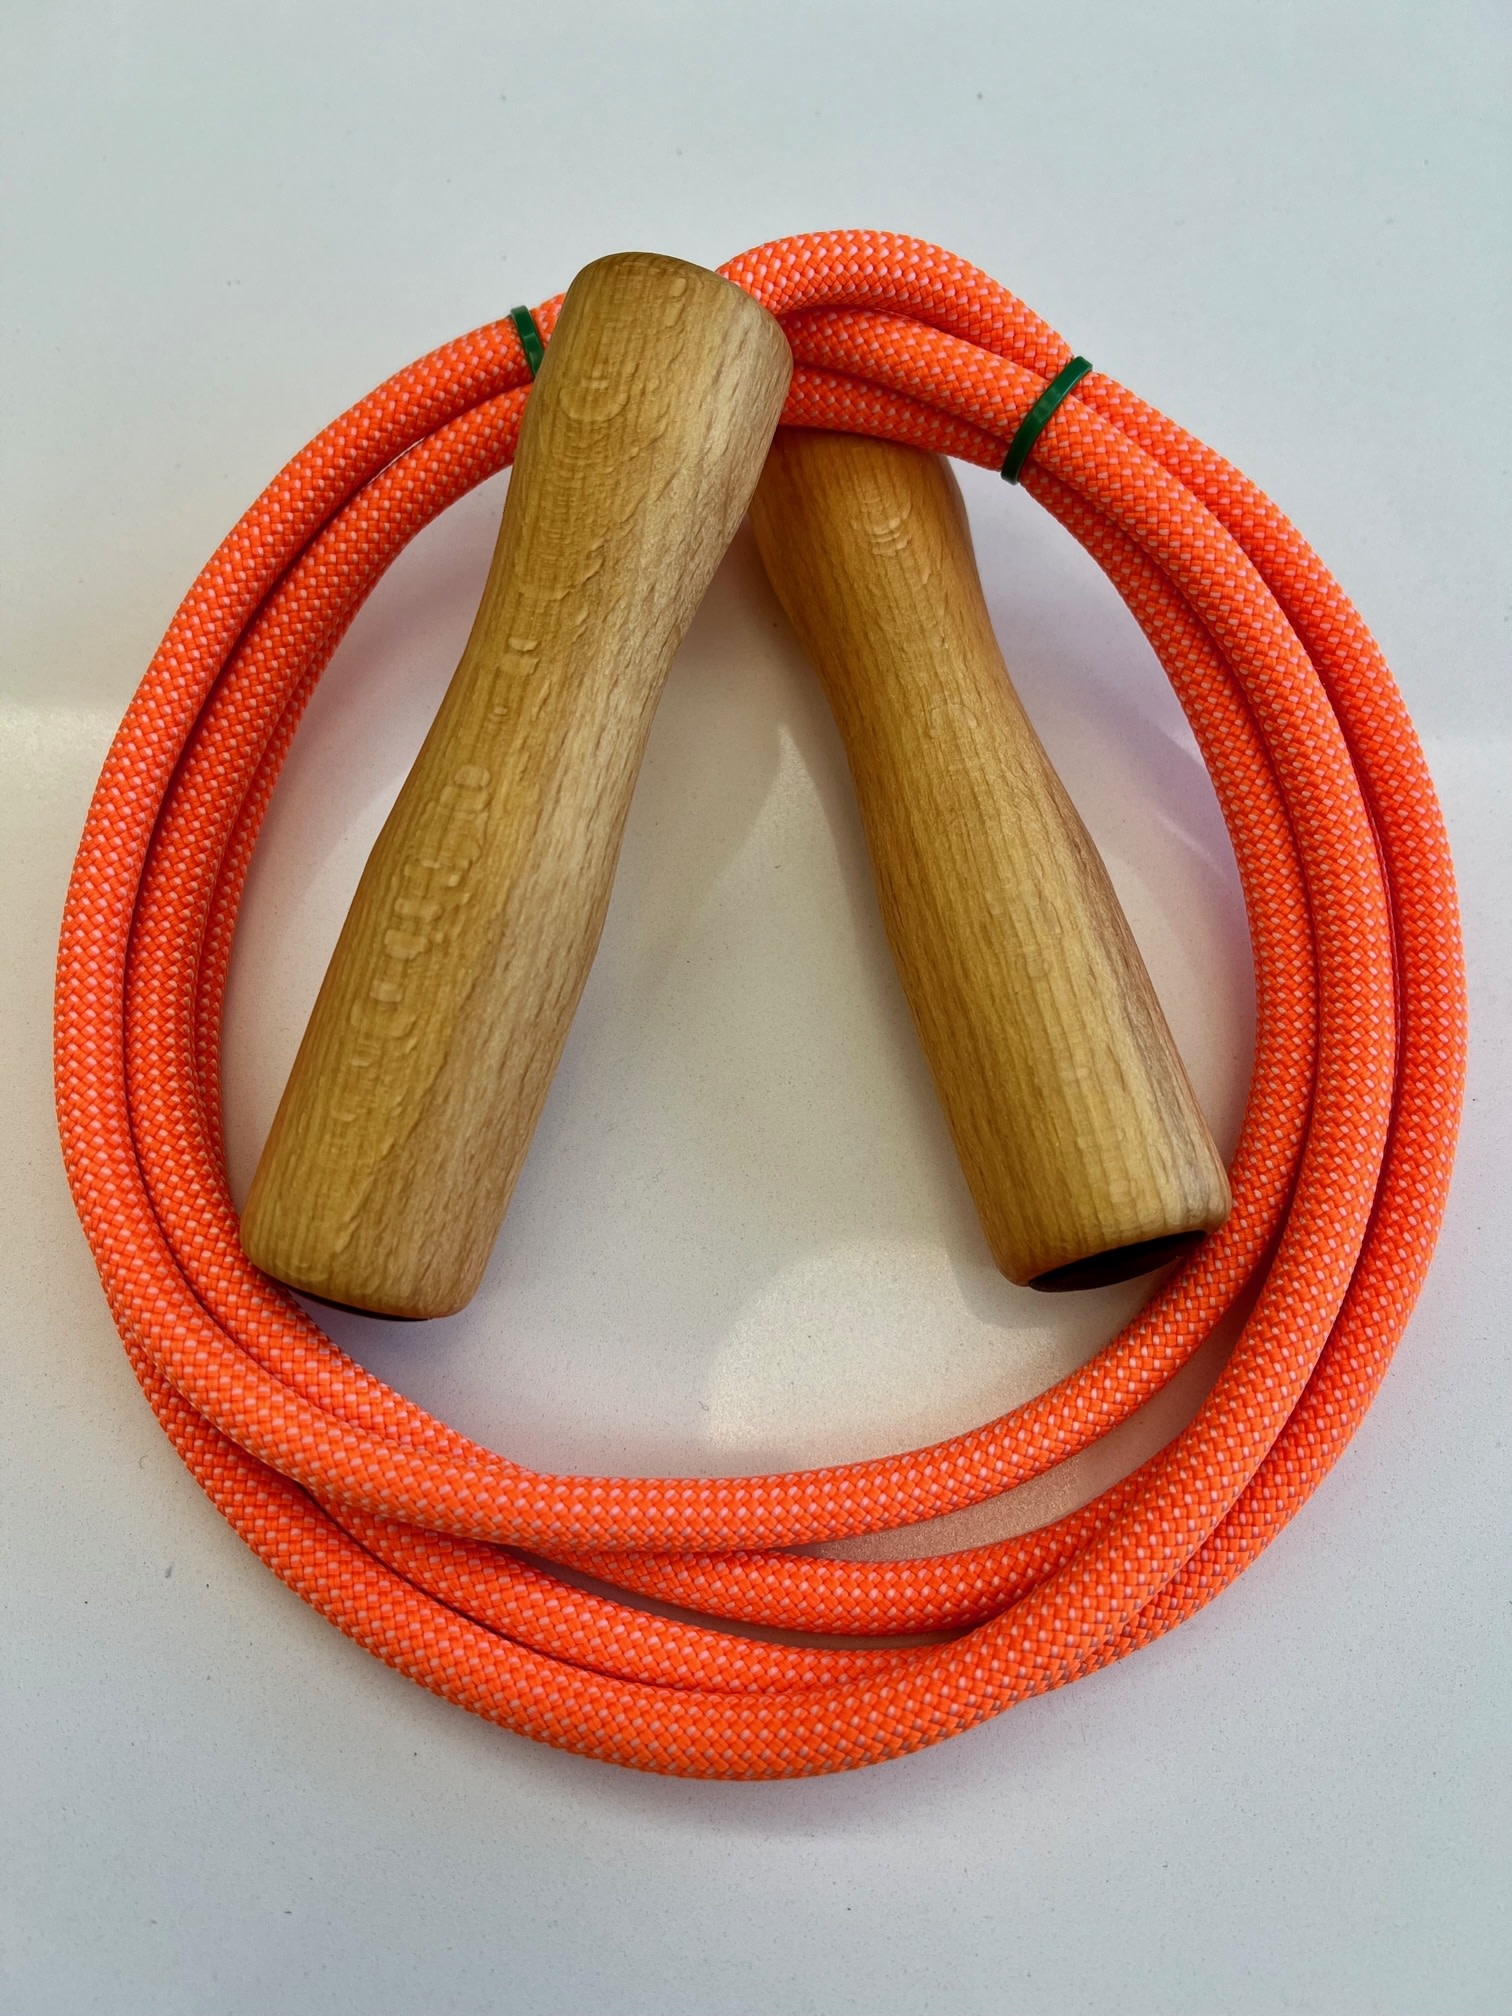 Mercurius Skipping rope large 239 cm (94”) - For body height 135-155 cm (53-61 inch)